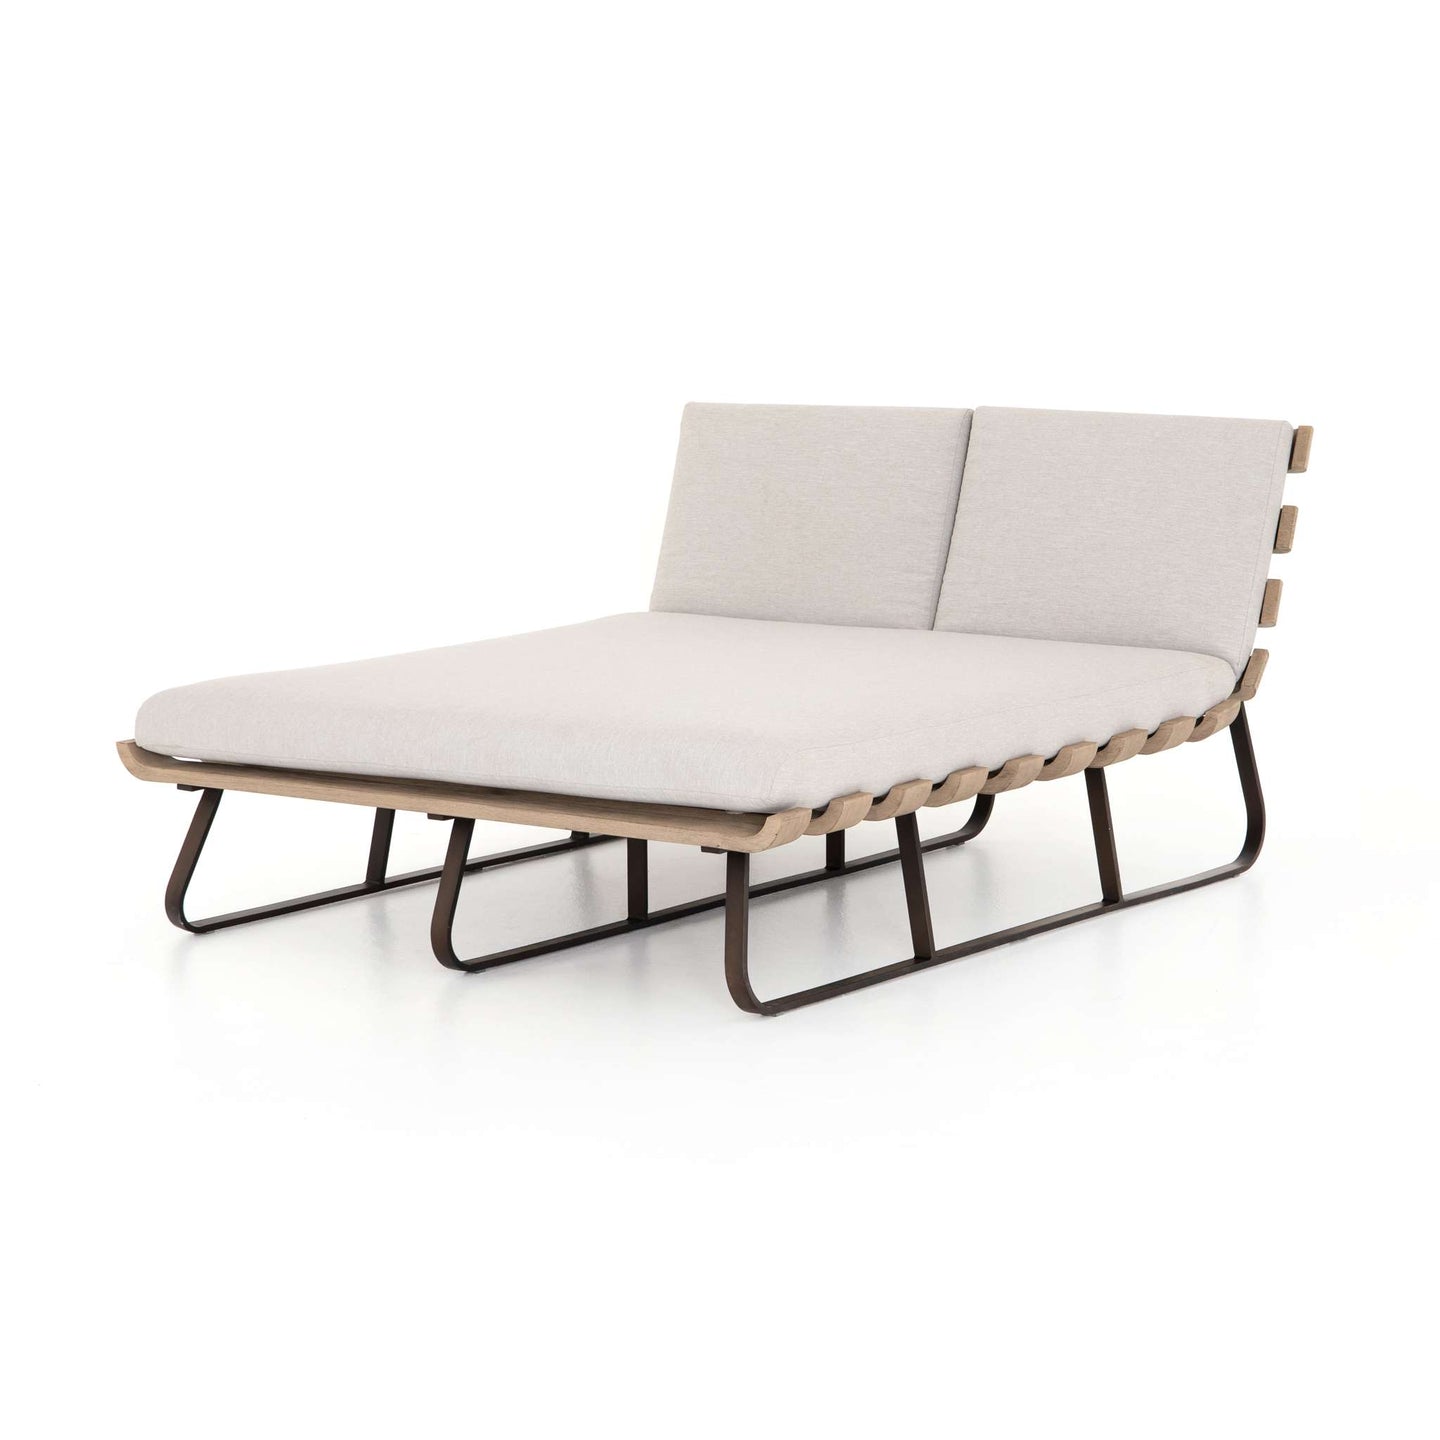 Dimitri Outdoor Dbl Chaise Lounge